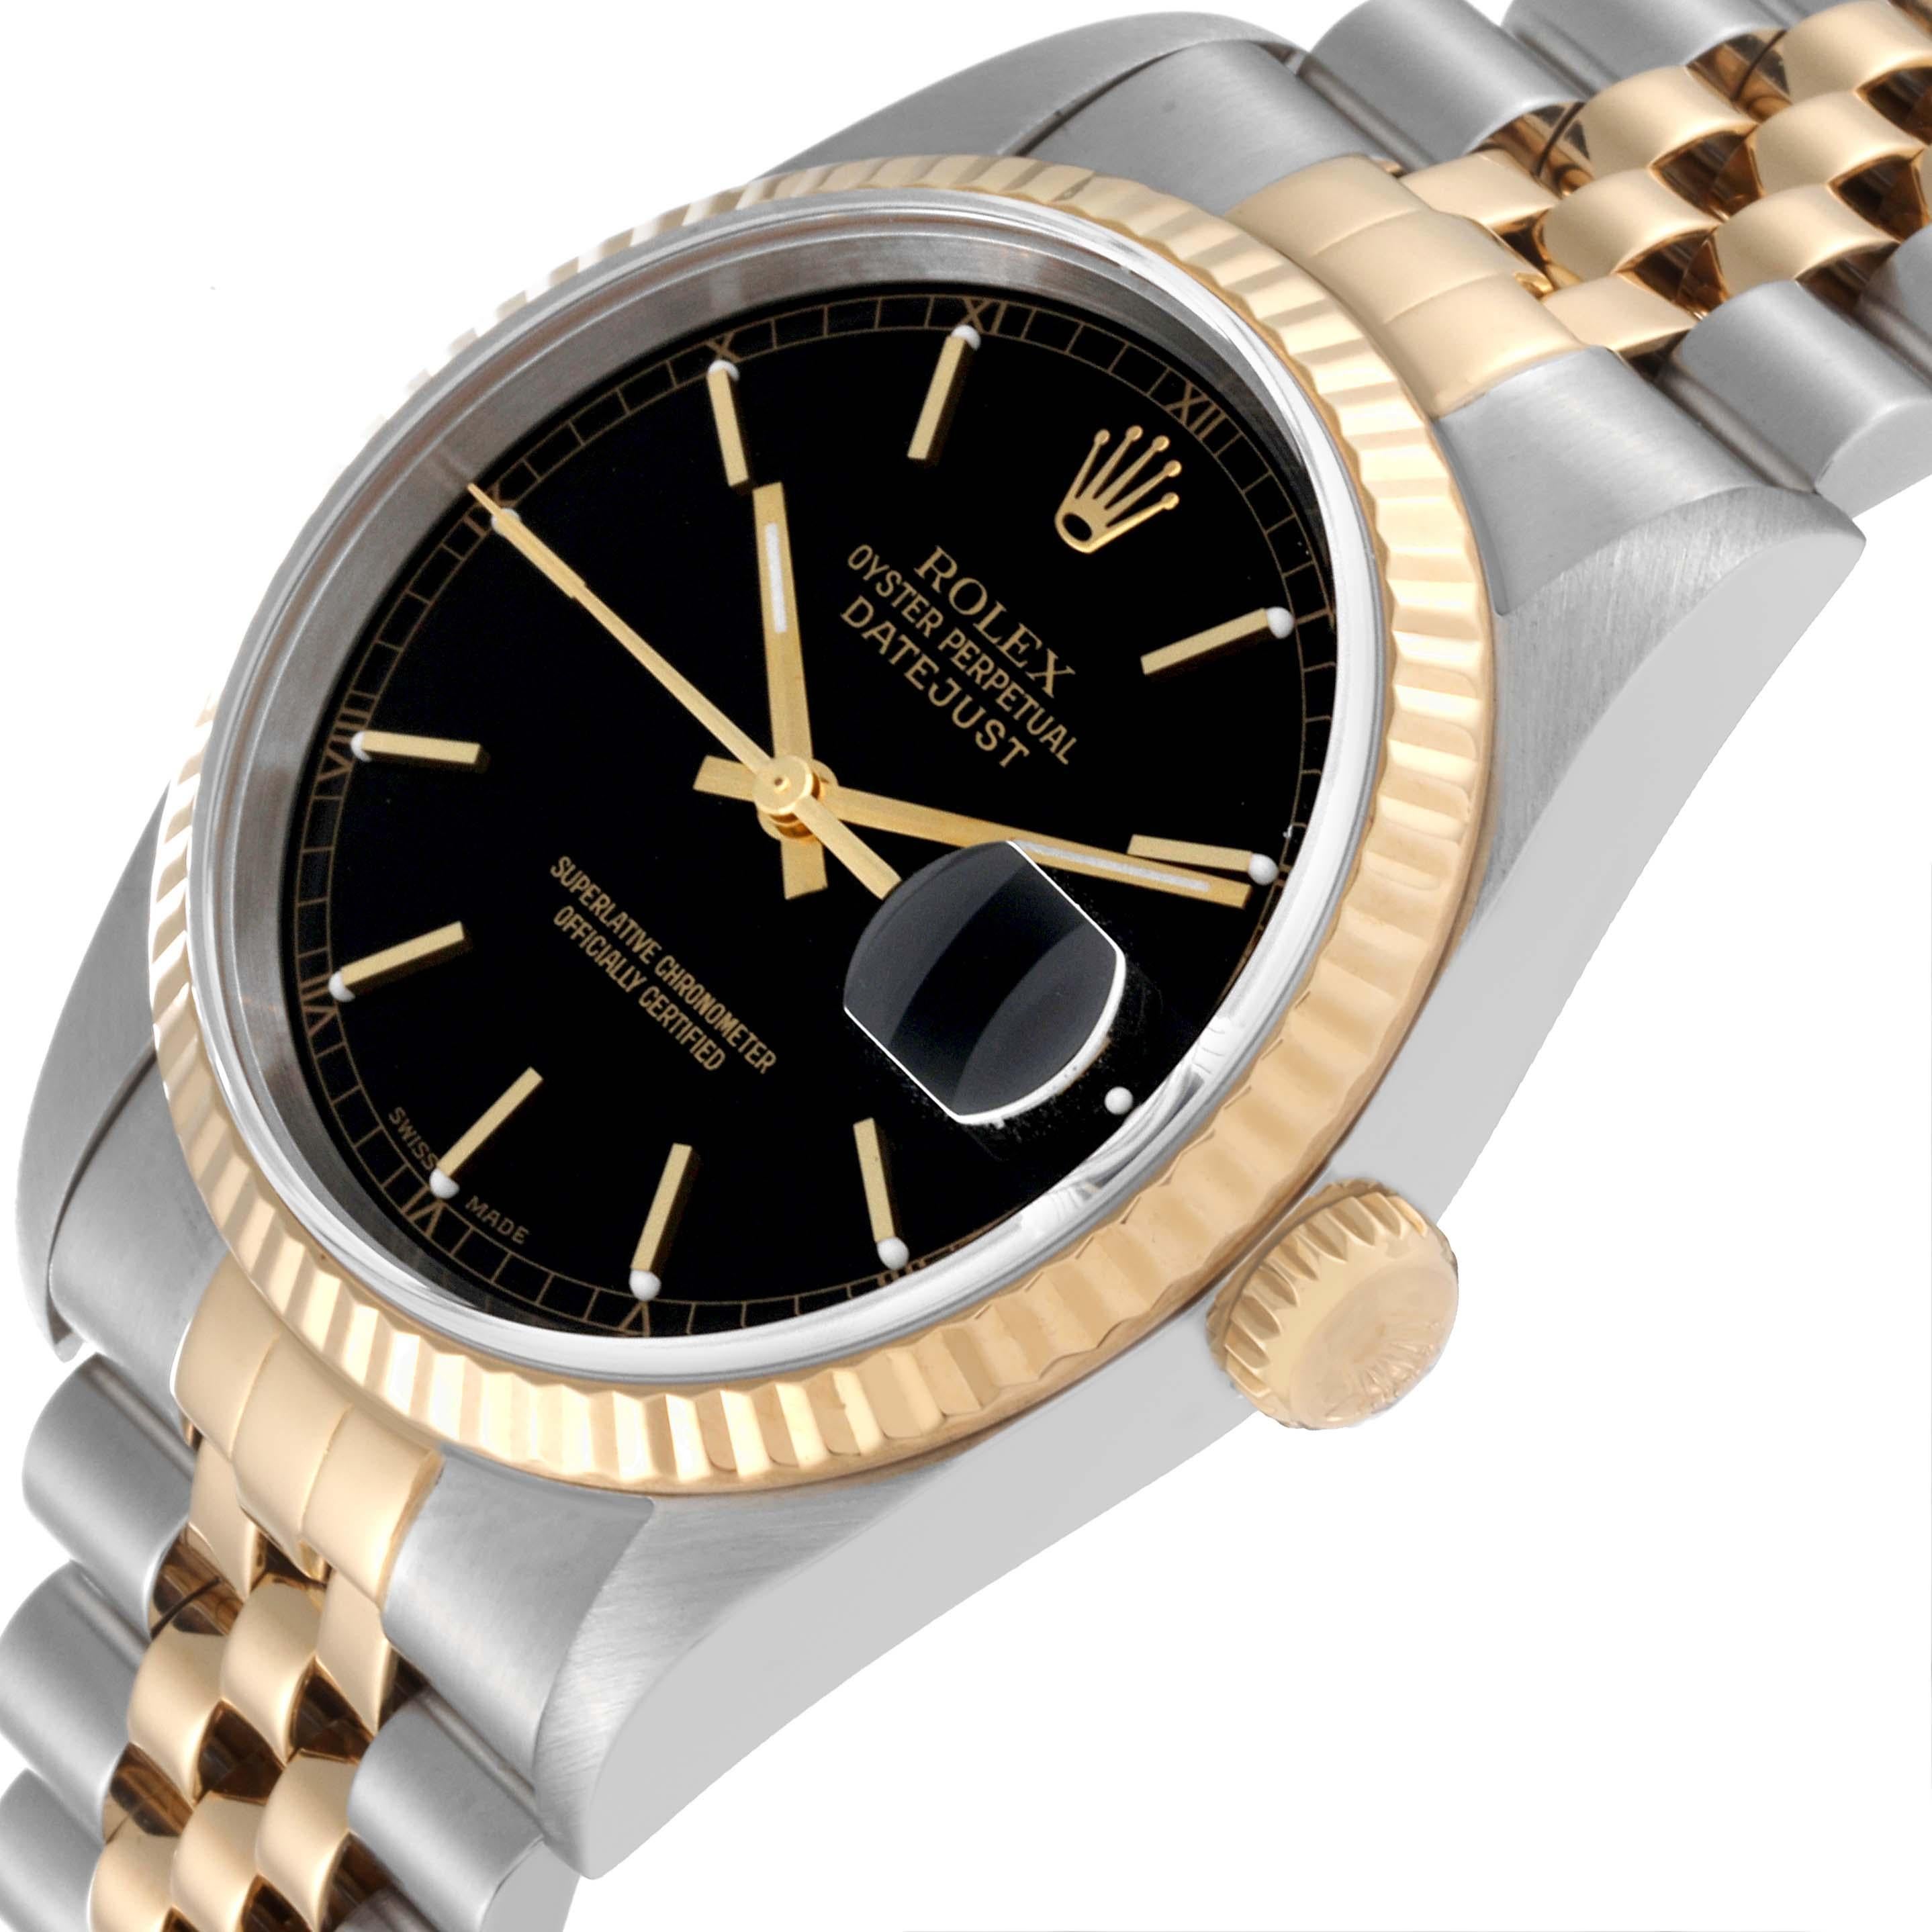 Men's Rolex Datejust 36 Steel Yellow Gold Black Dial Mens Watch 16233 Box Papers